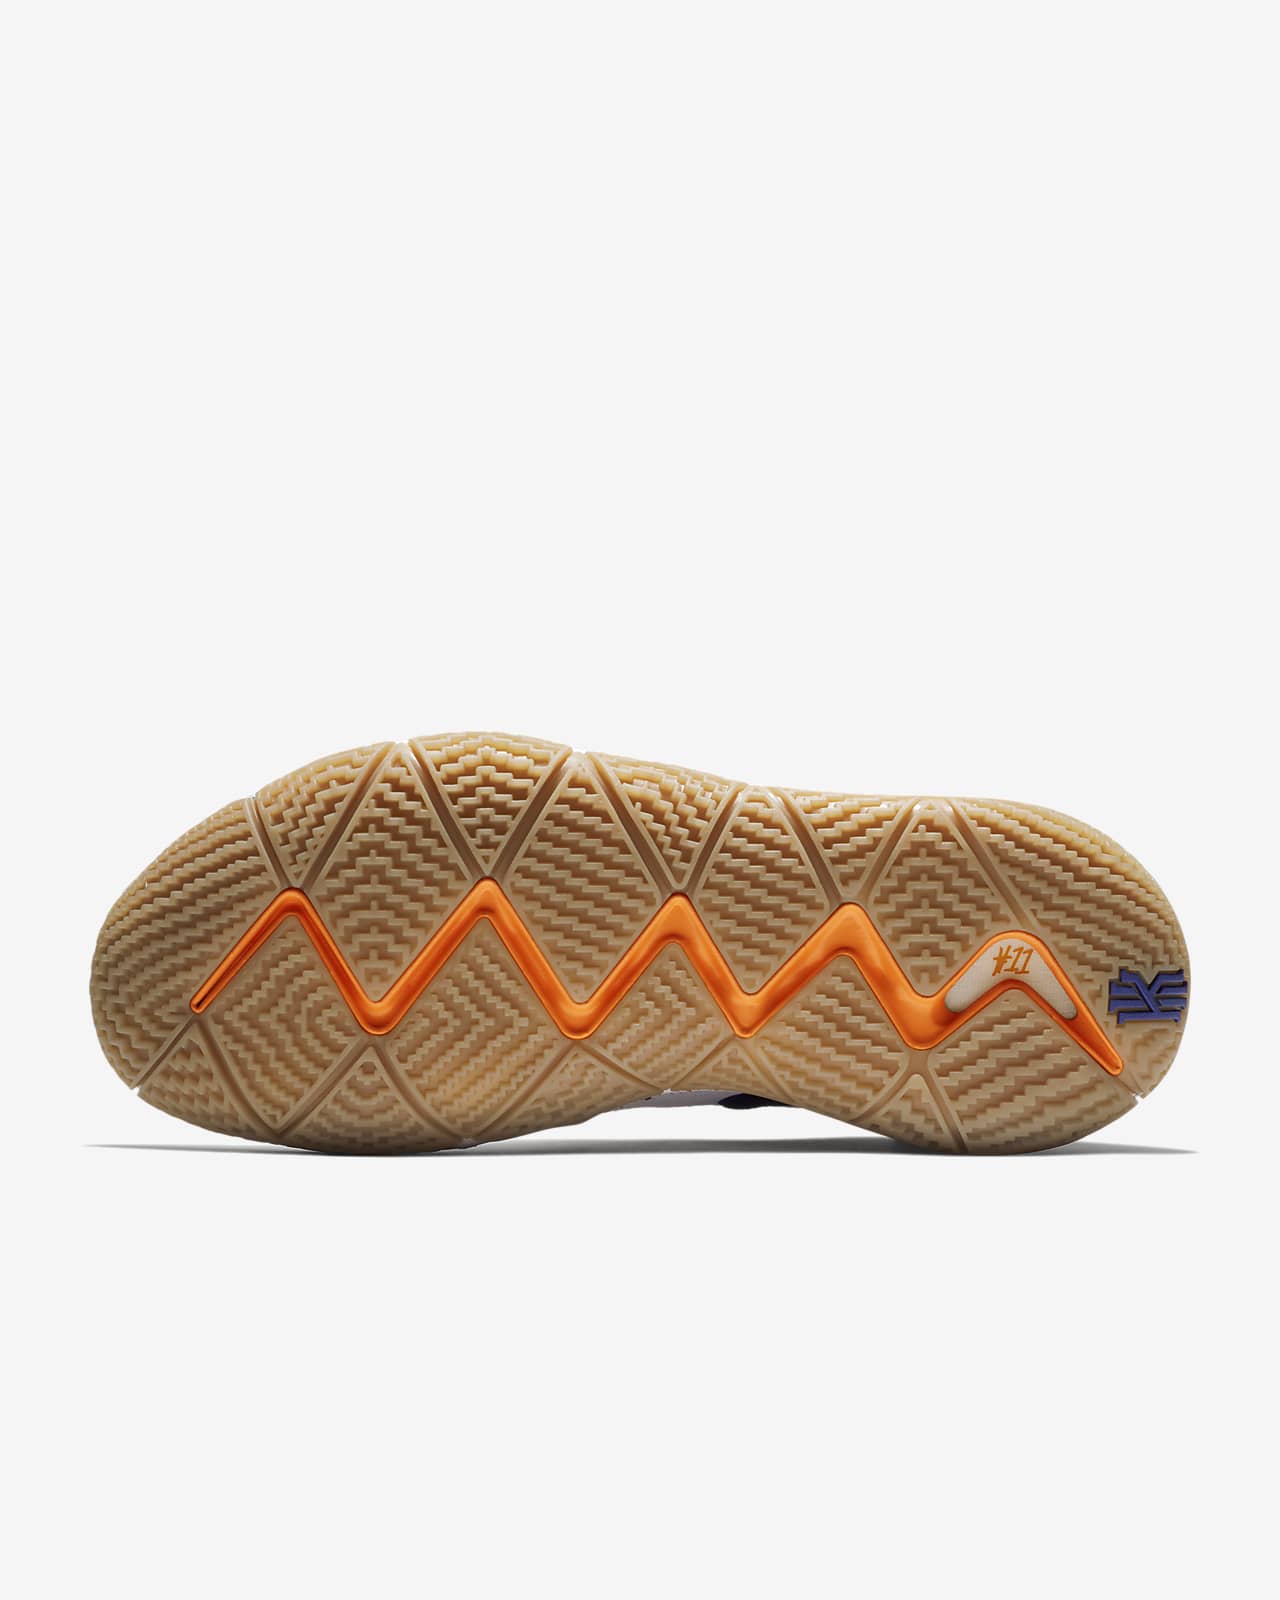 nike kyrie 4 basketball shoes uncle drew